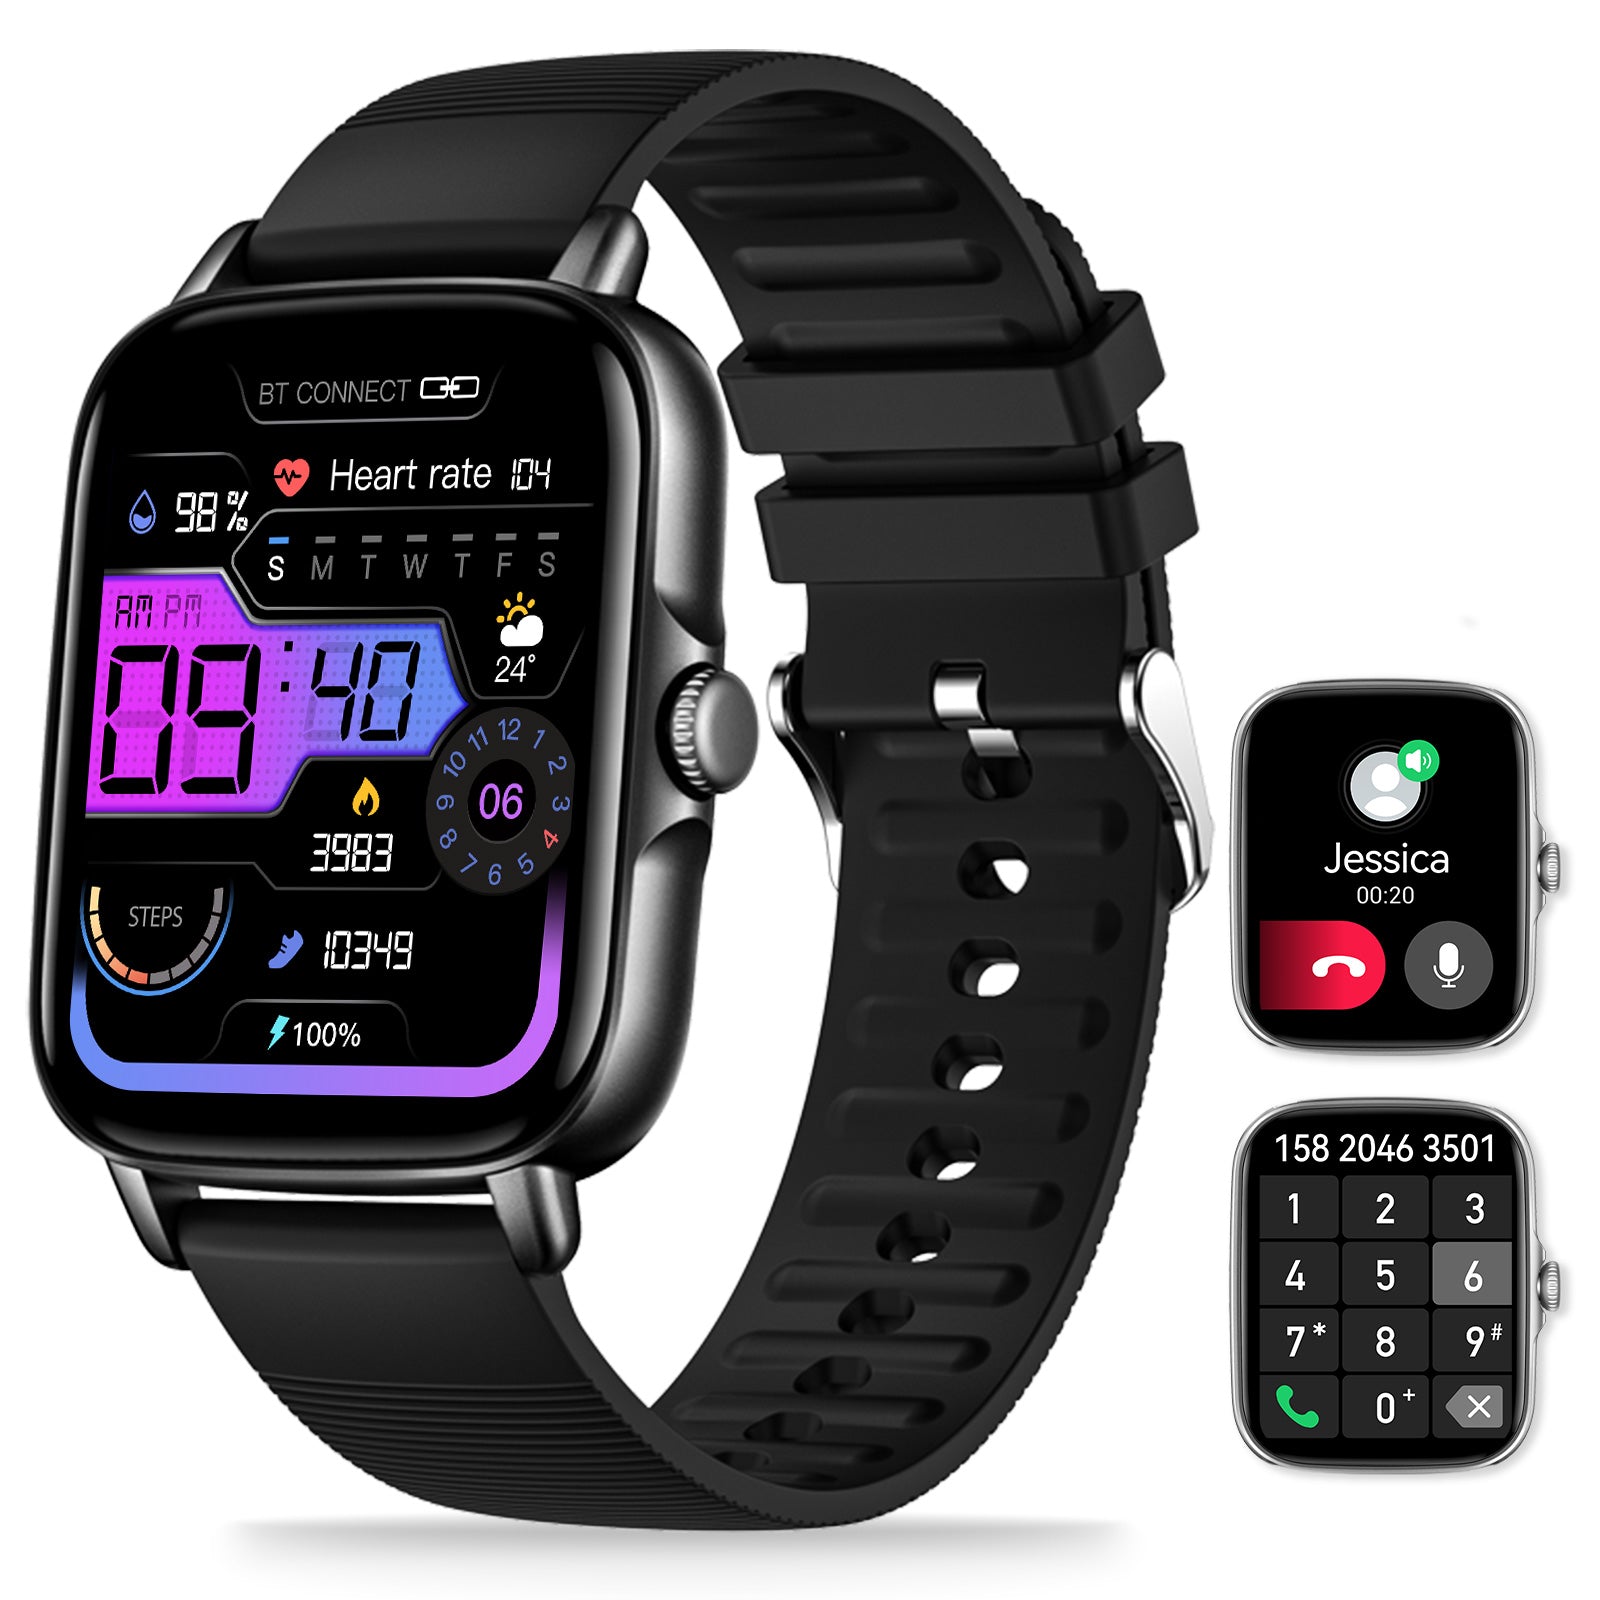 EIGIIS KE3 Smart Watch: Specs, Price, Pros & Cons - Chinese Smartwatches